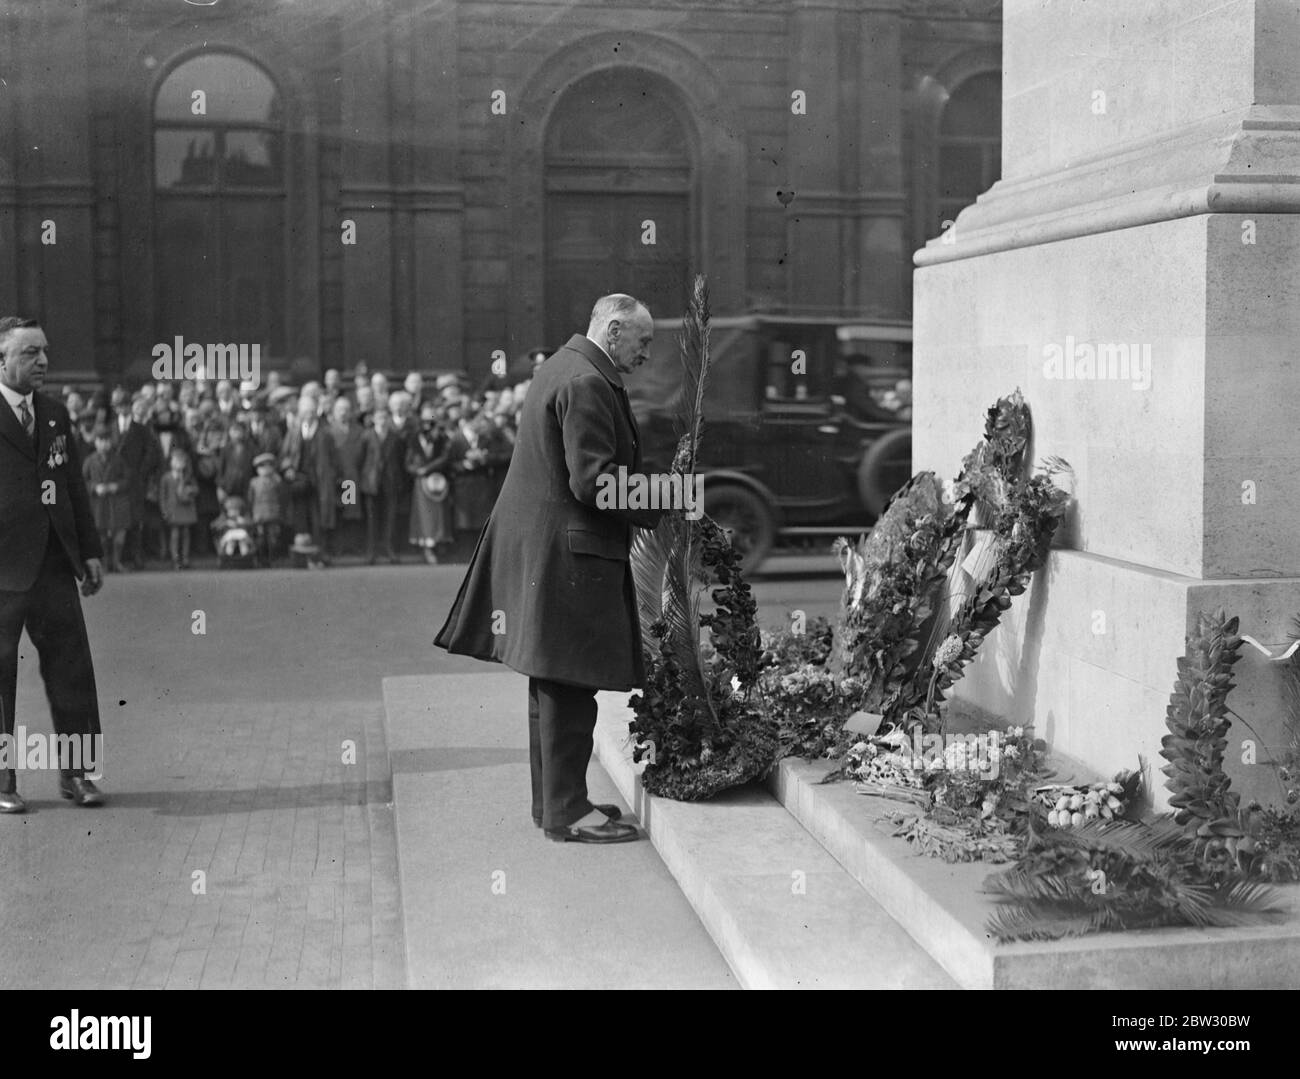 Fourteenth anniversary of Fifth Army Retreat commemorated in London . General Sir Ivor Maxe , inspected the Red Fox Comrades Association , who took part in the Fifth Army Retreat fourteen years ago during the War , at the Horse Guards Parade London . General Sir Ivor Maxe placing a wreath on the Cenotaph in Whitehall , London . 20 March 1932 Stock Photo